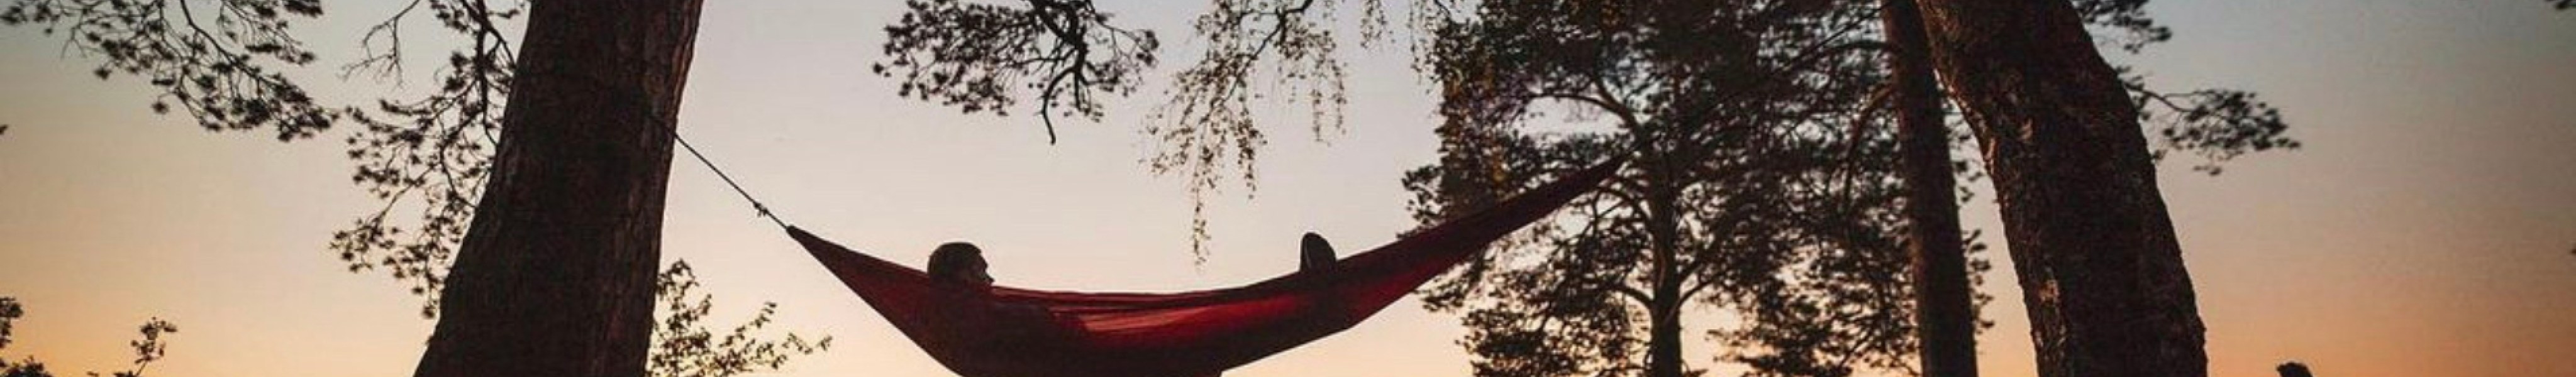 Person in hammock during golden hour